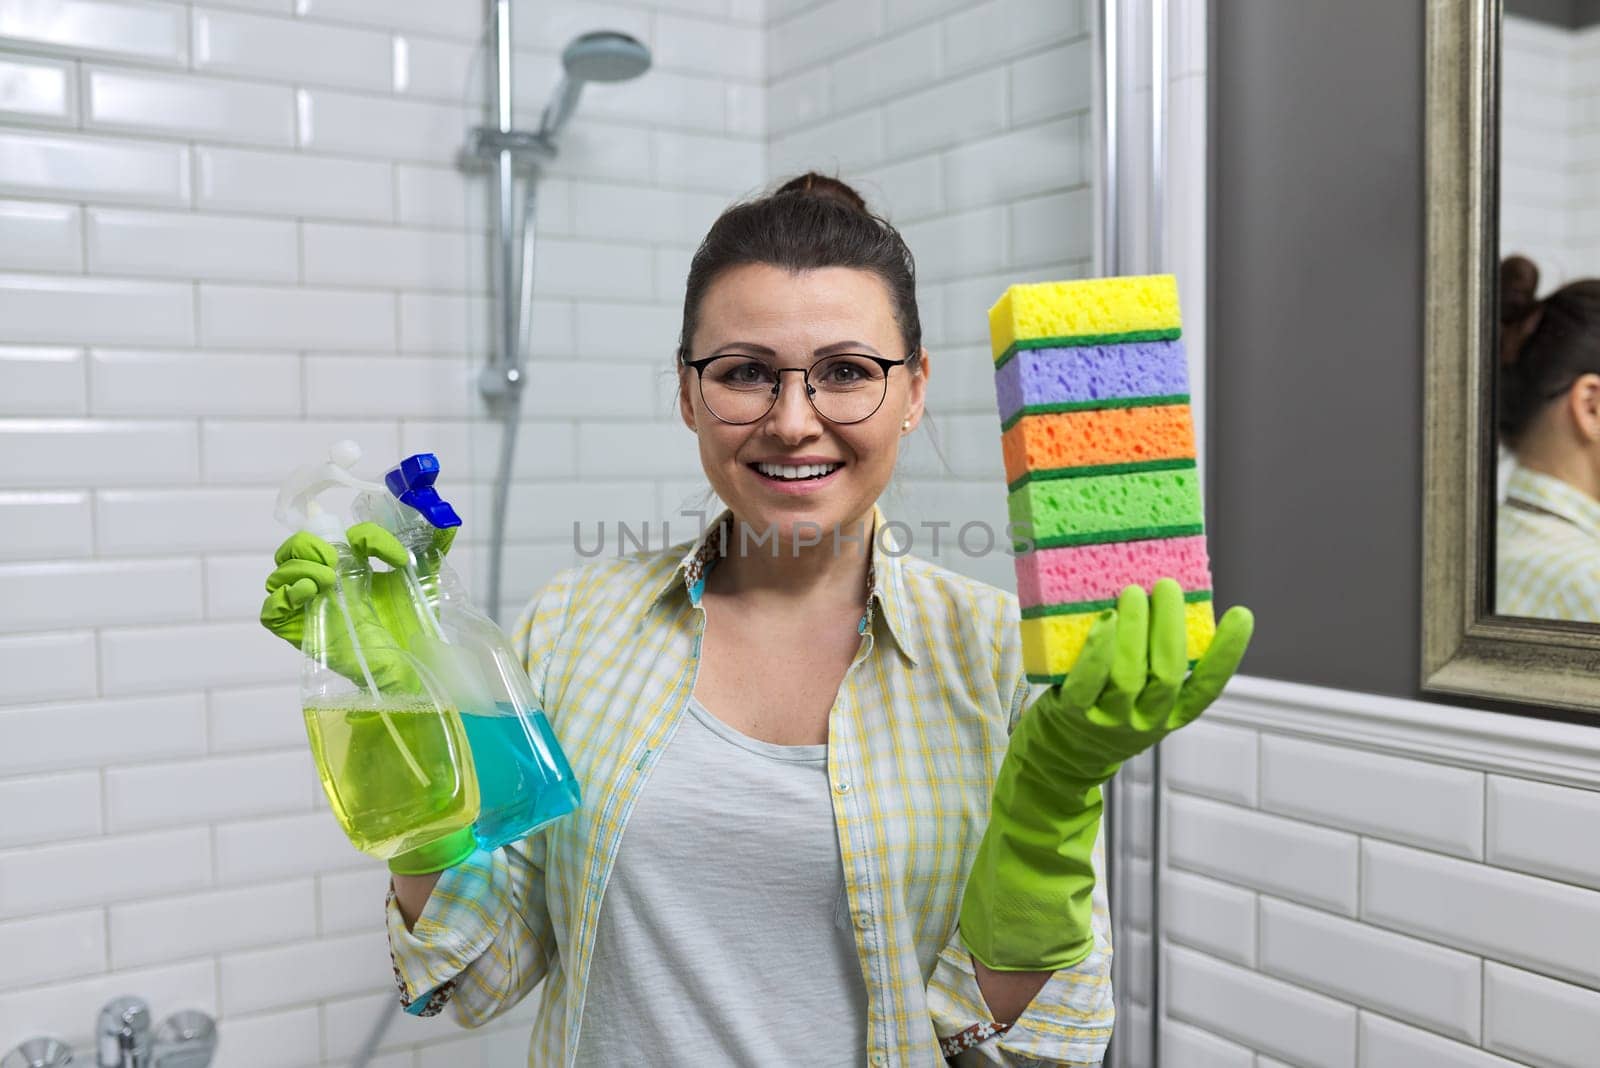 Cleaning in the bathroom. Woman cleaning at home in bathroom holding detergents and sponges in hands